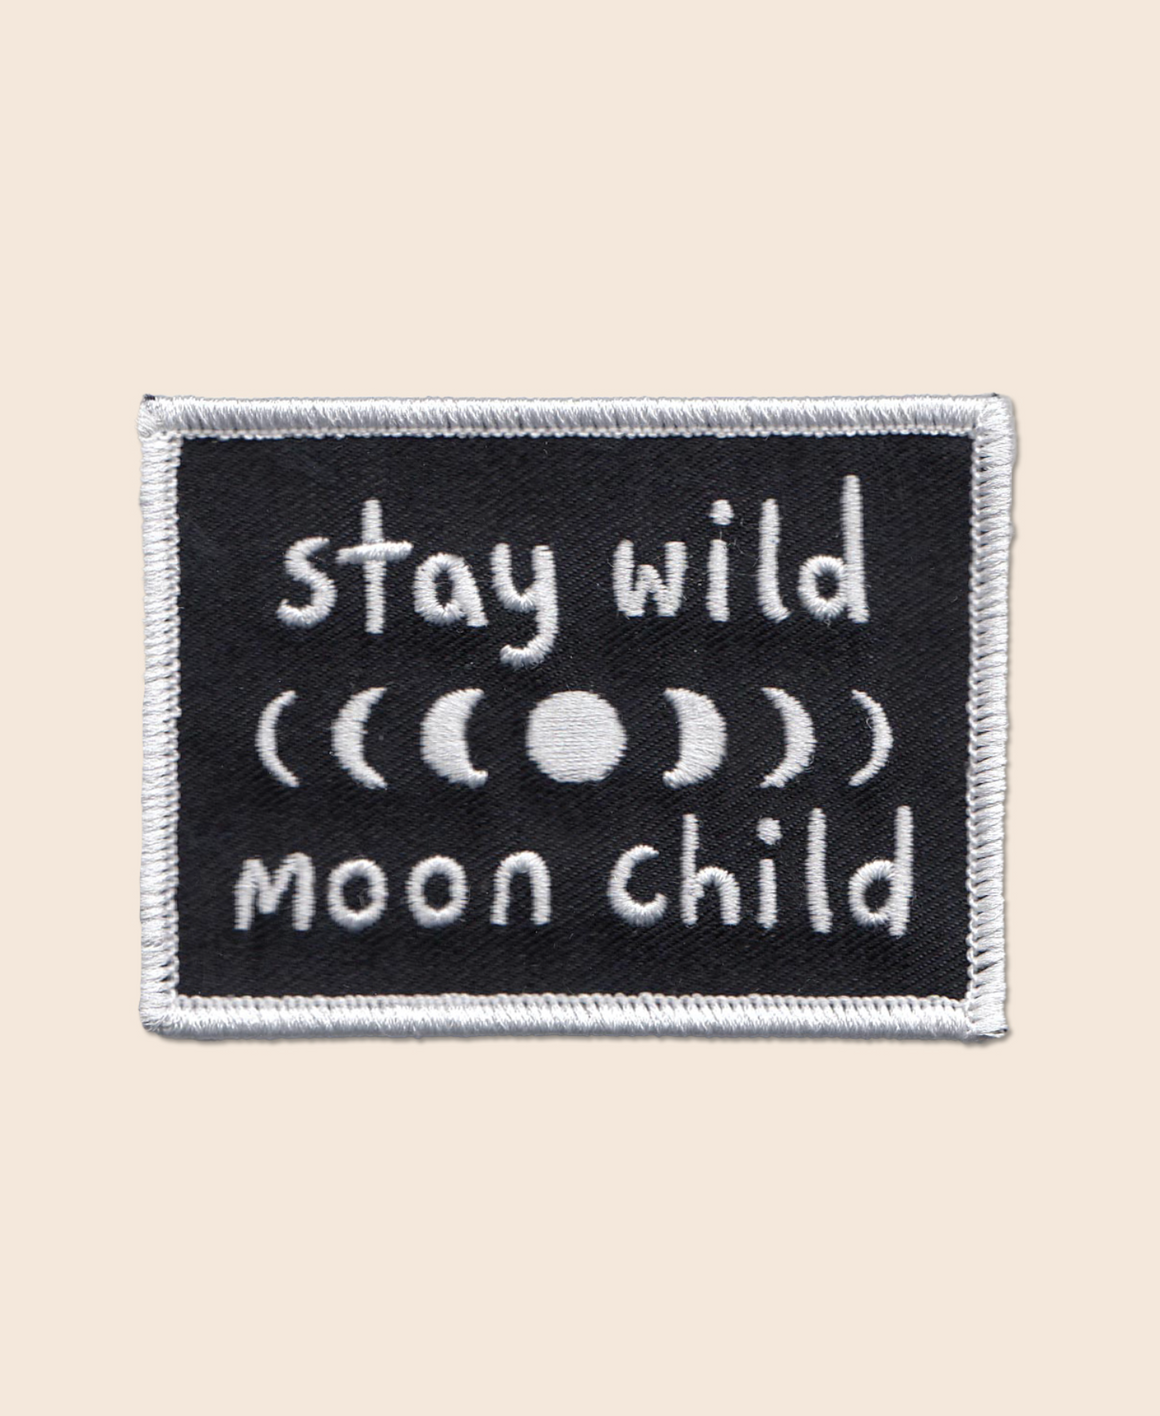 Stay Wild Moon Child Iron-On Patch